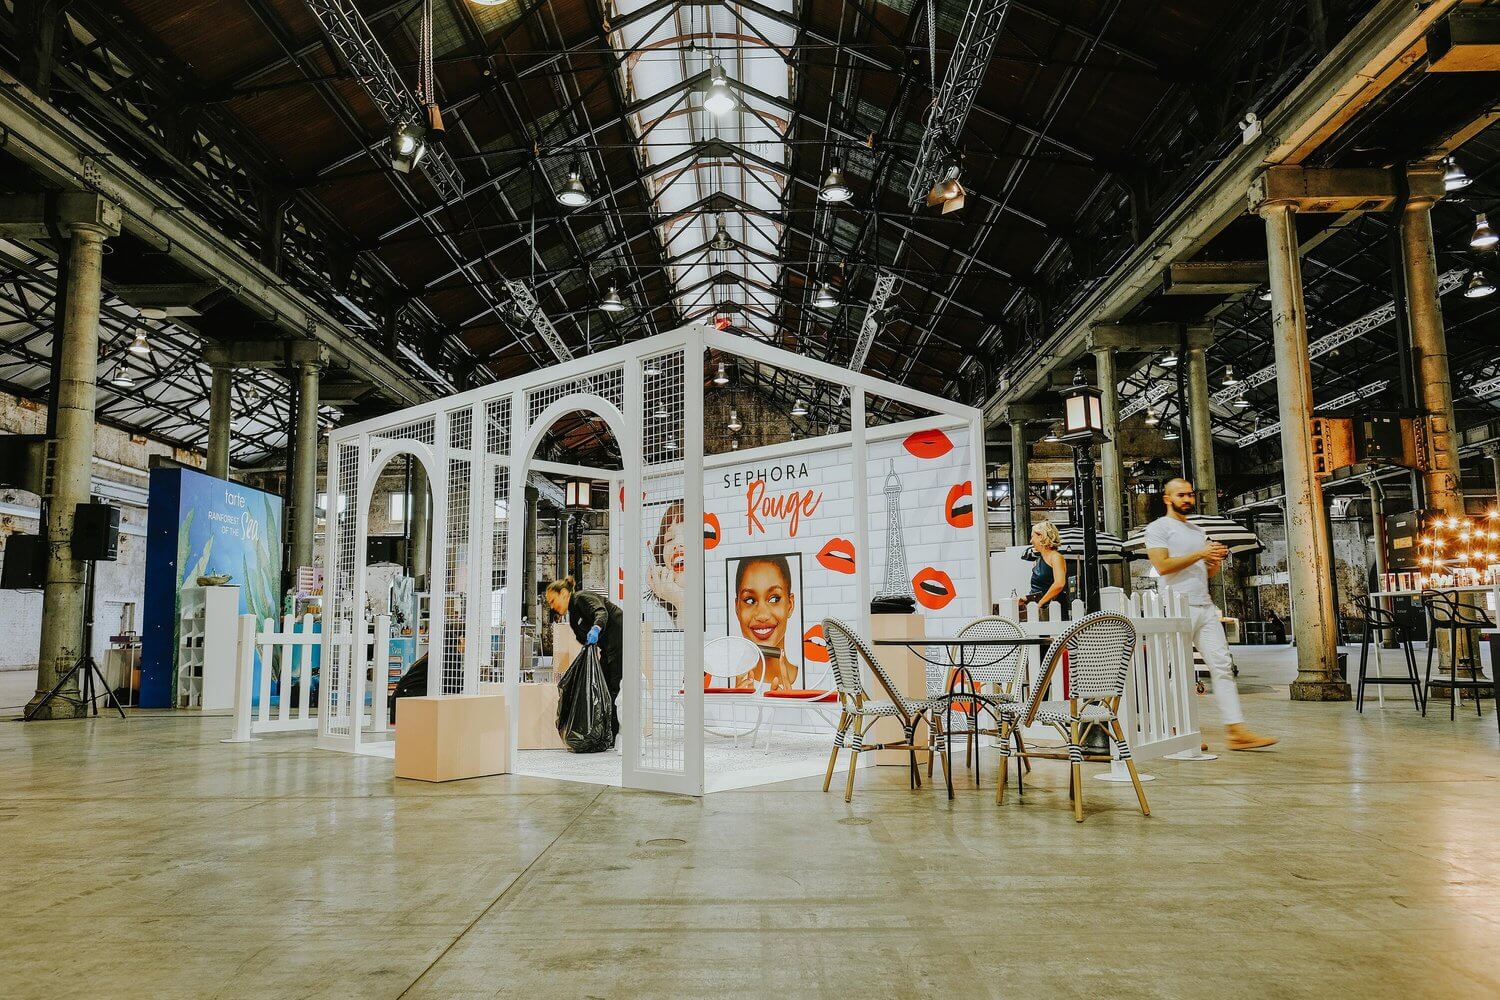 A display of the Sephora Rouge range in a large warehouse with a table and chairs in front of it.